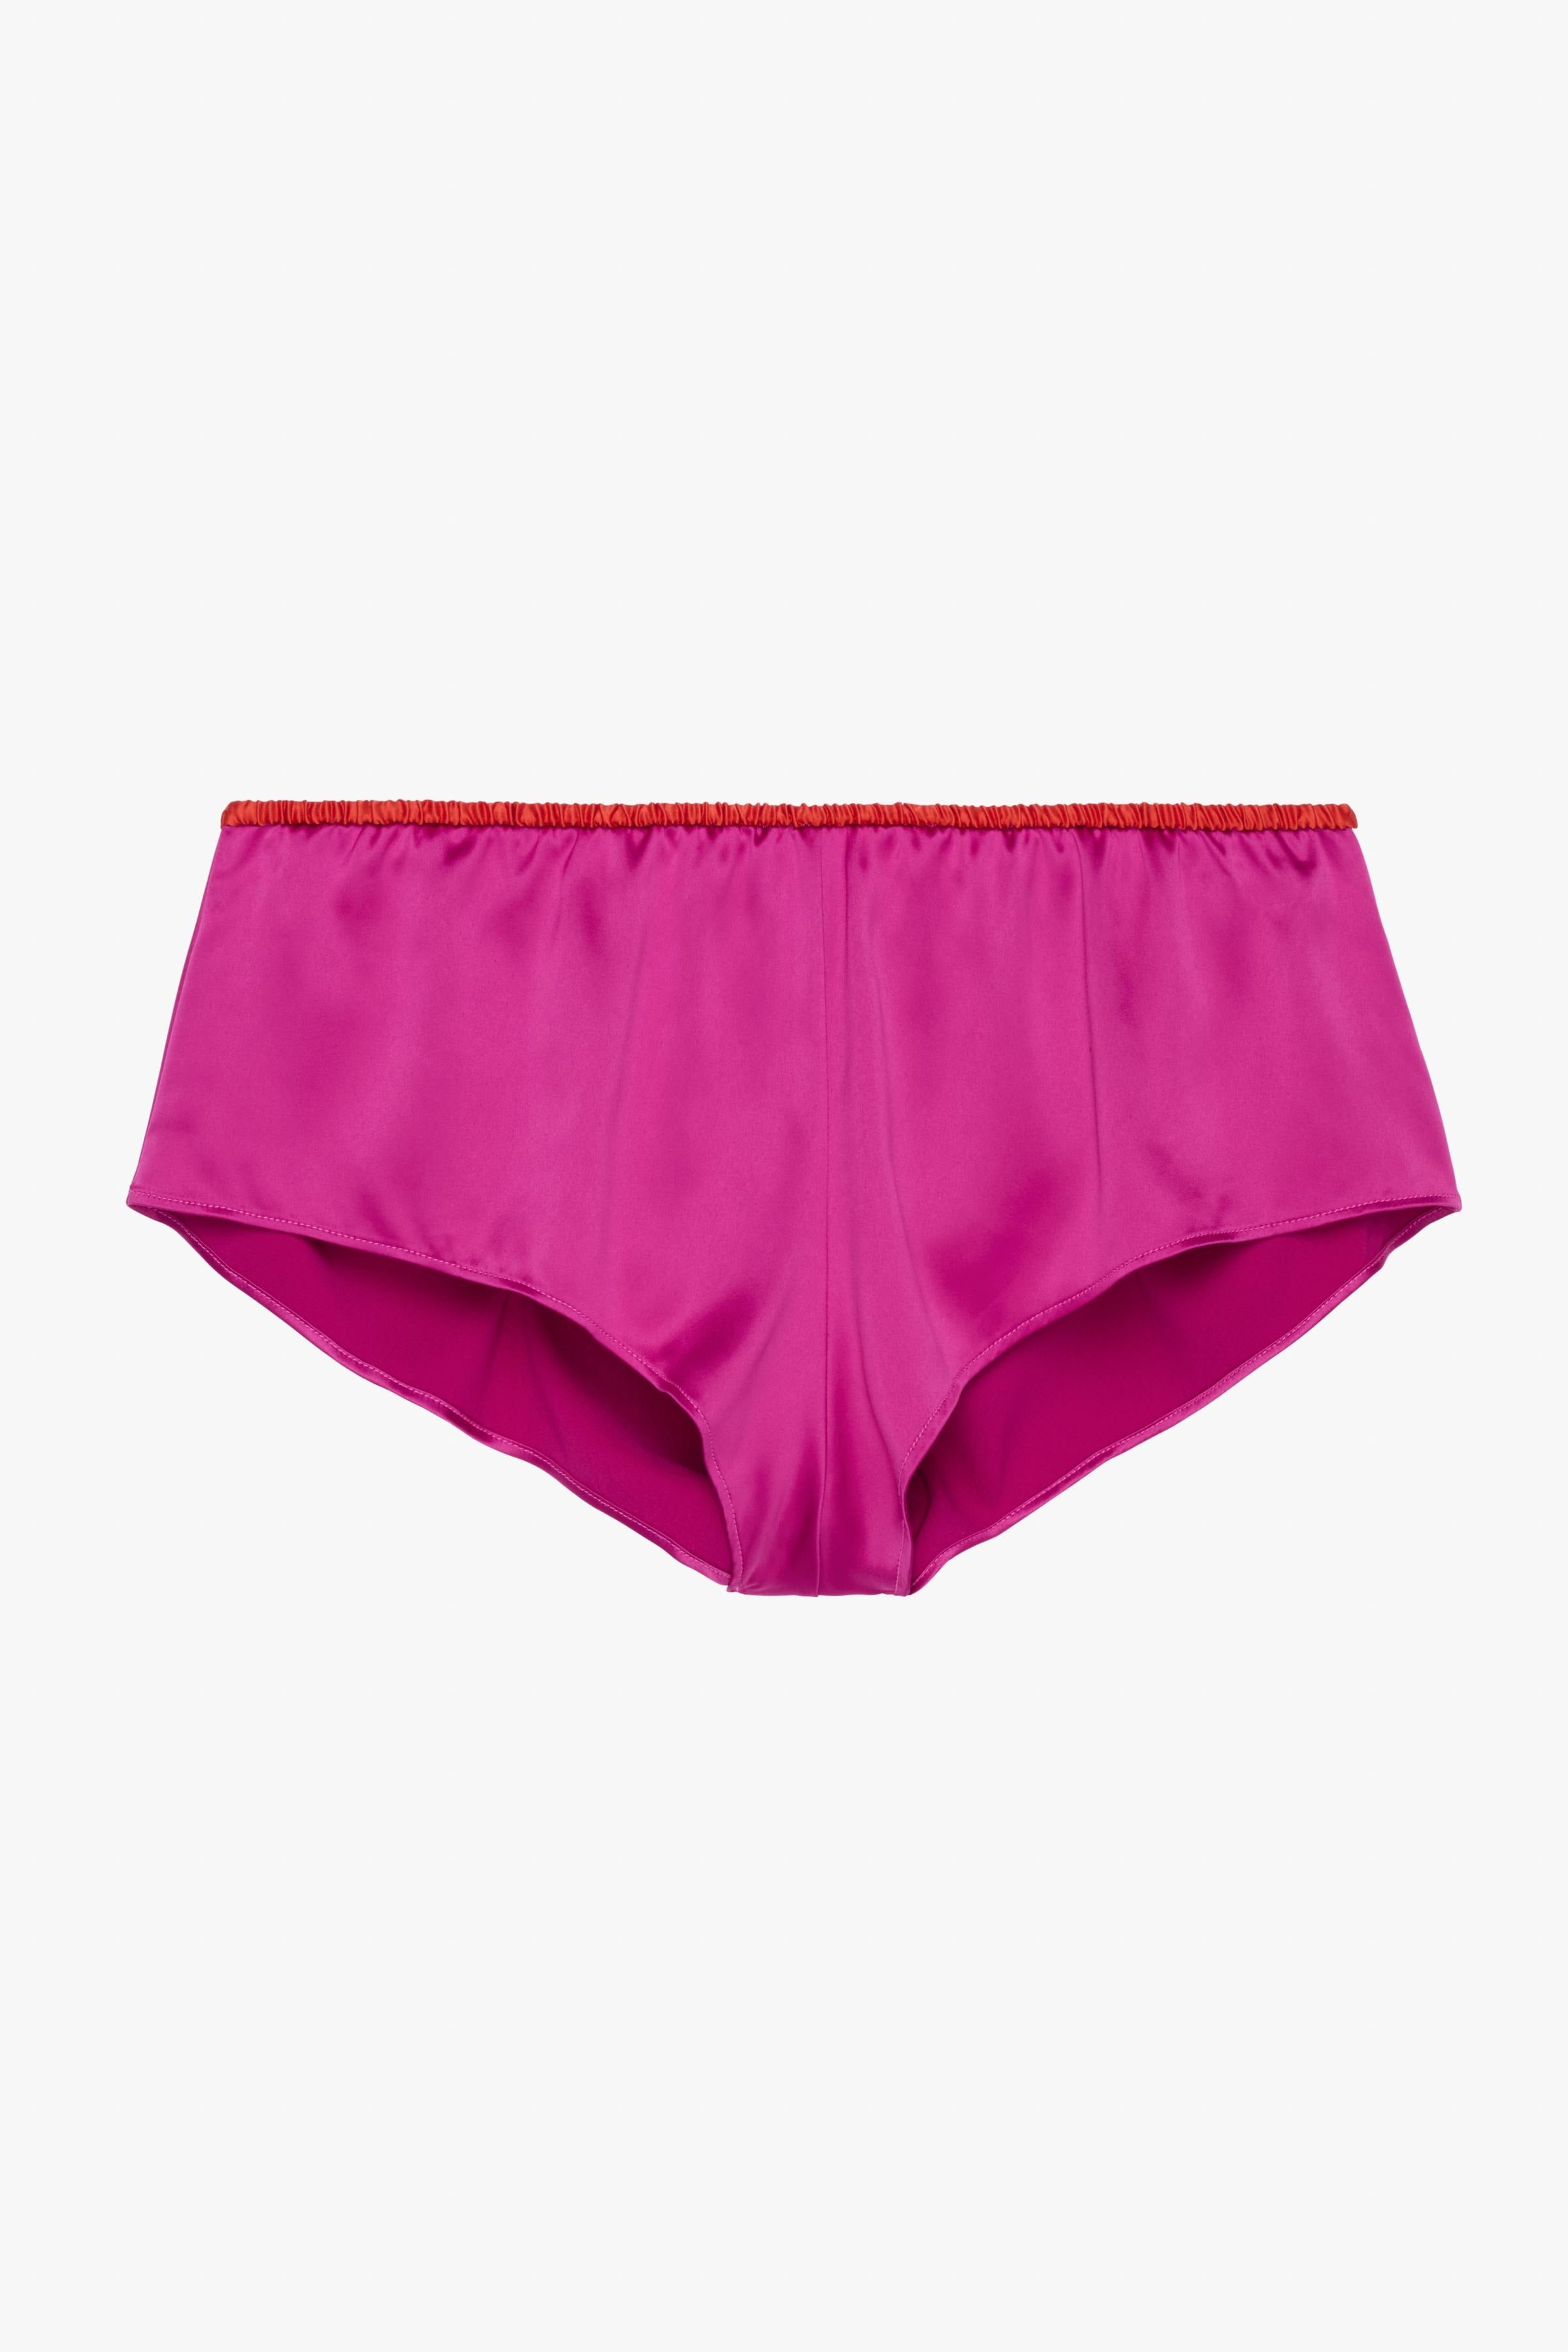 Lane Bryant Hot Pink Silky No-Show French Cut Thong Panty Plus Size 14/16 –  IBBY